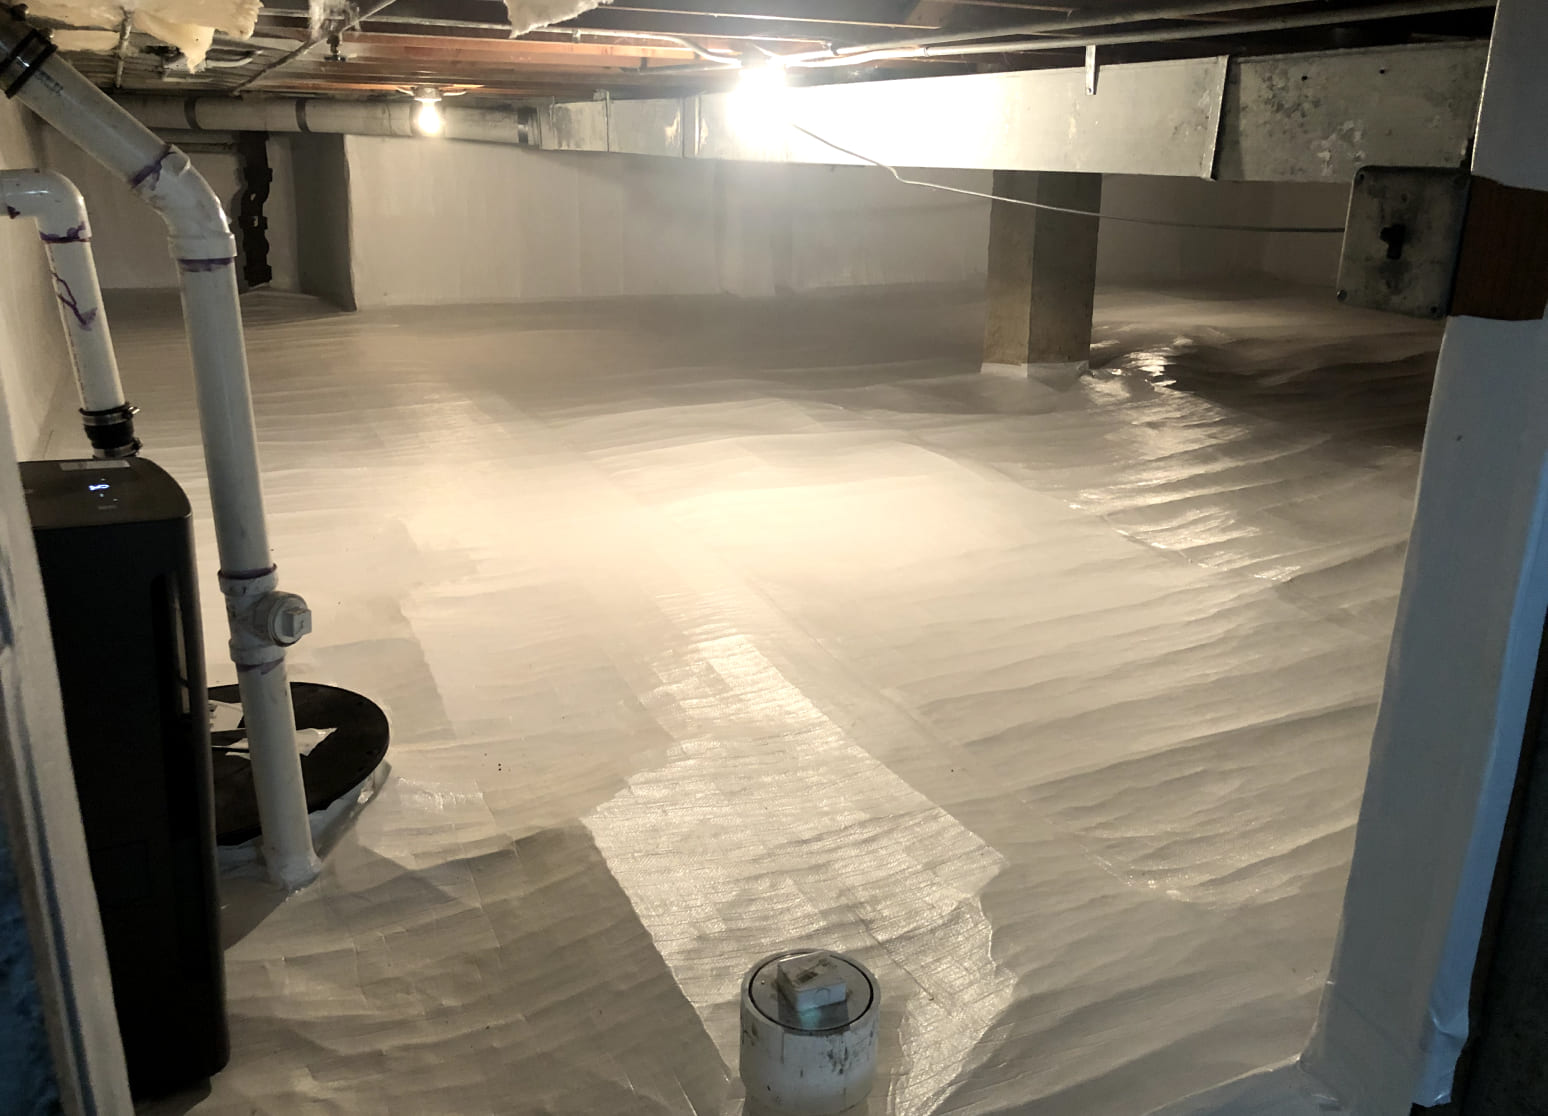 encapsulated crawl space by accu-dry